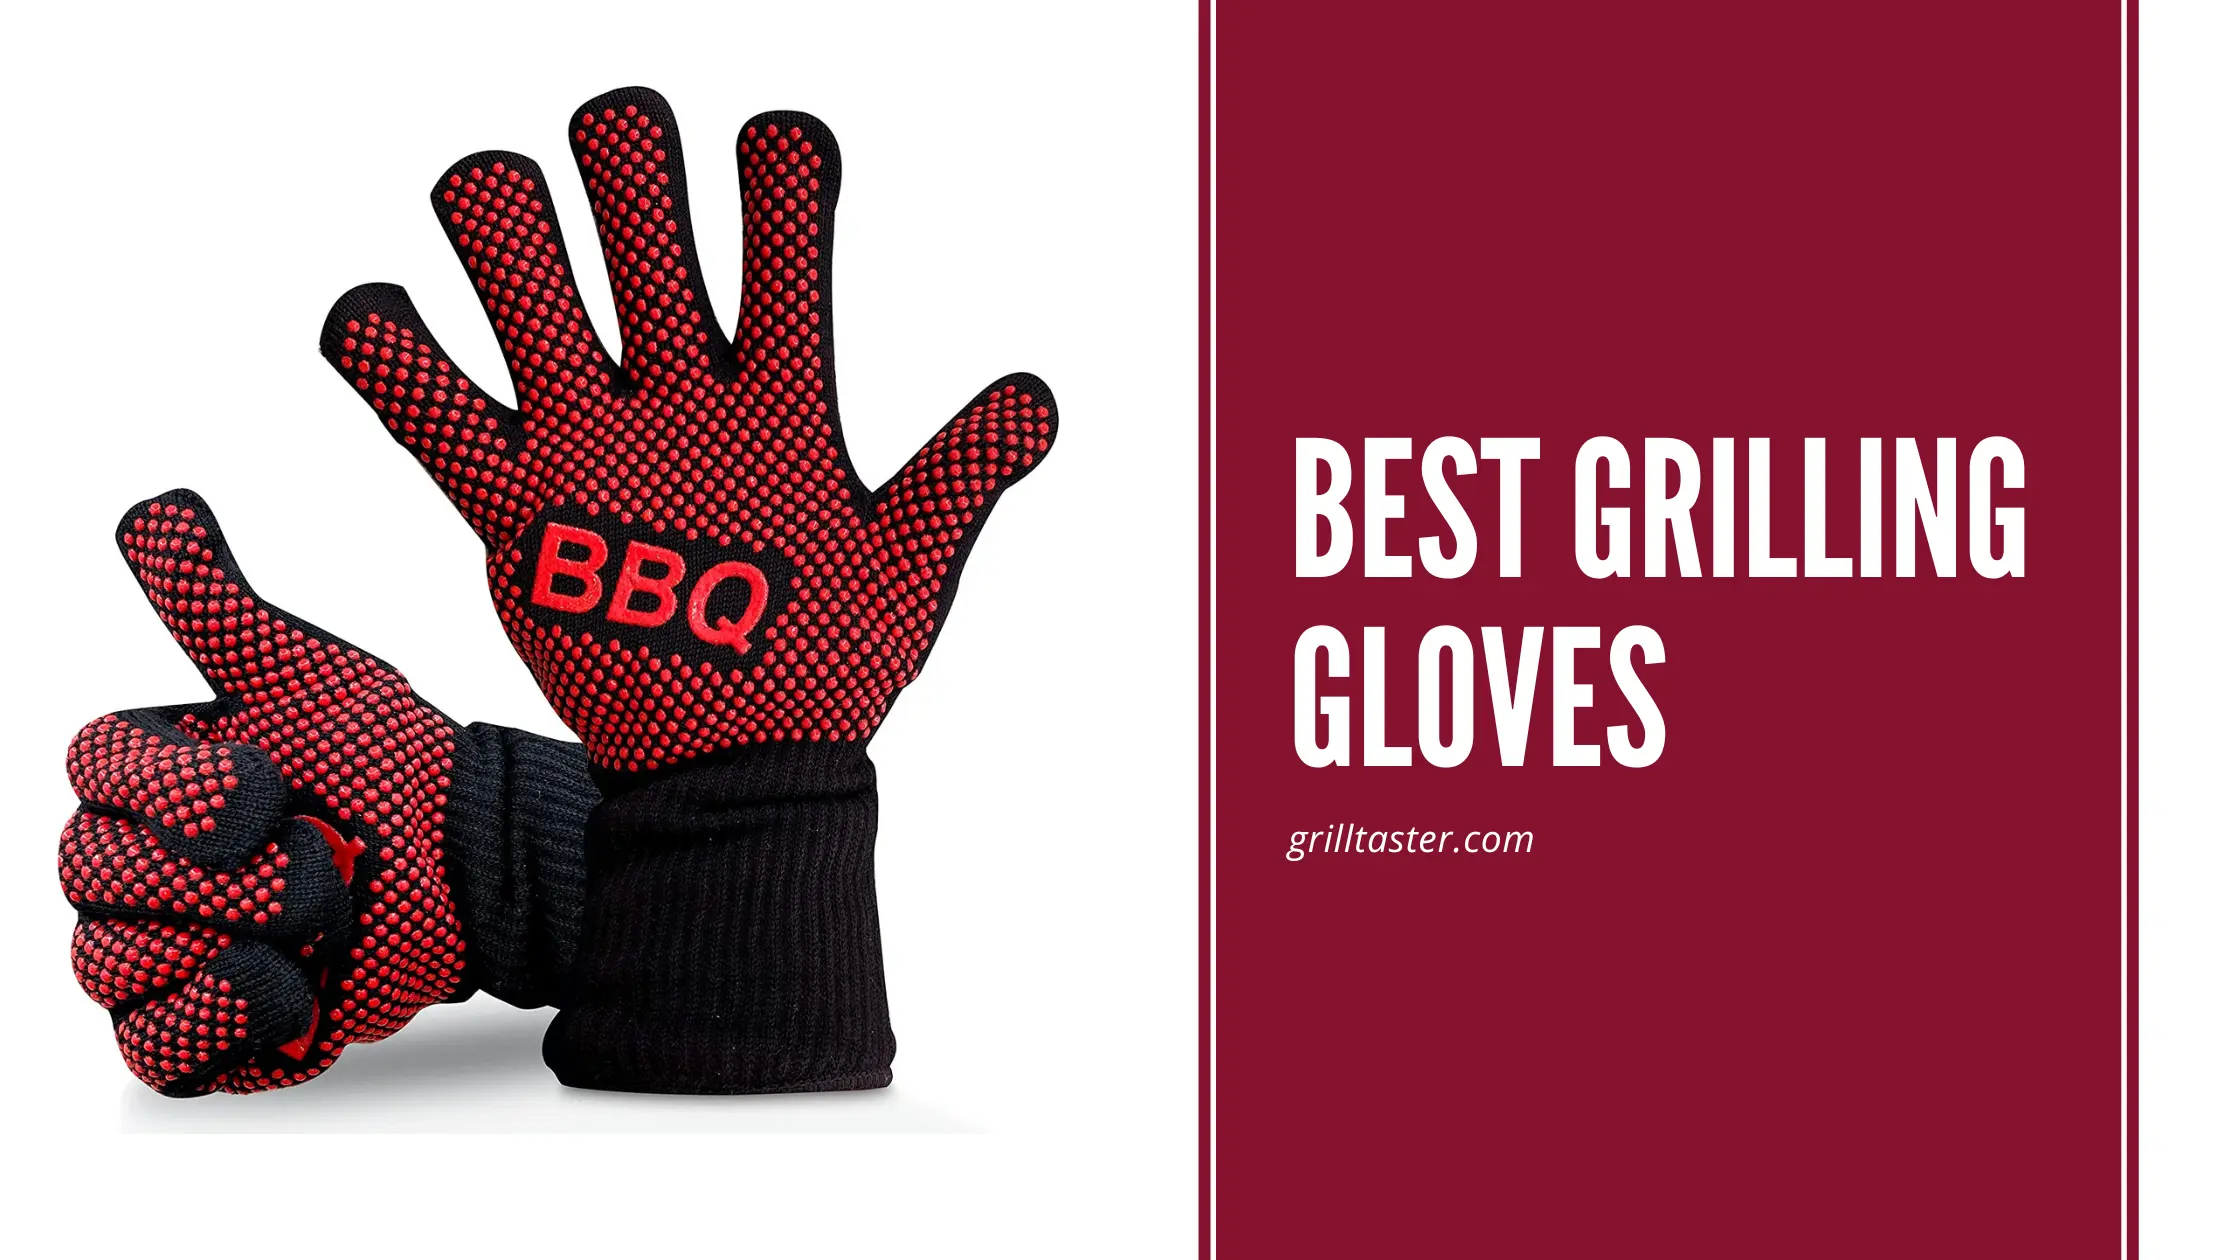 Top 7 Best Grilling Gloves | Safe and Delicious Grilling